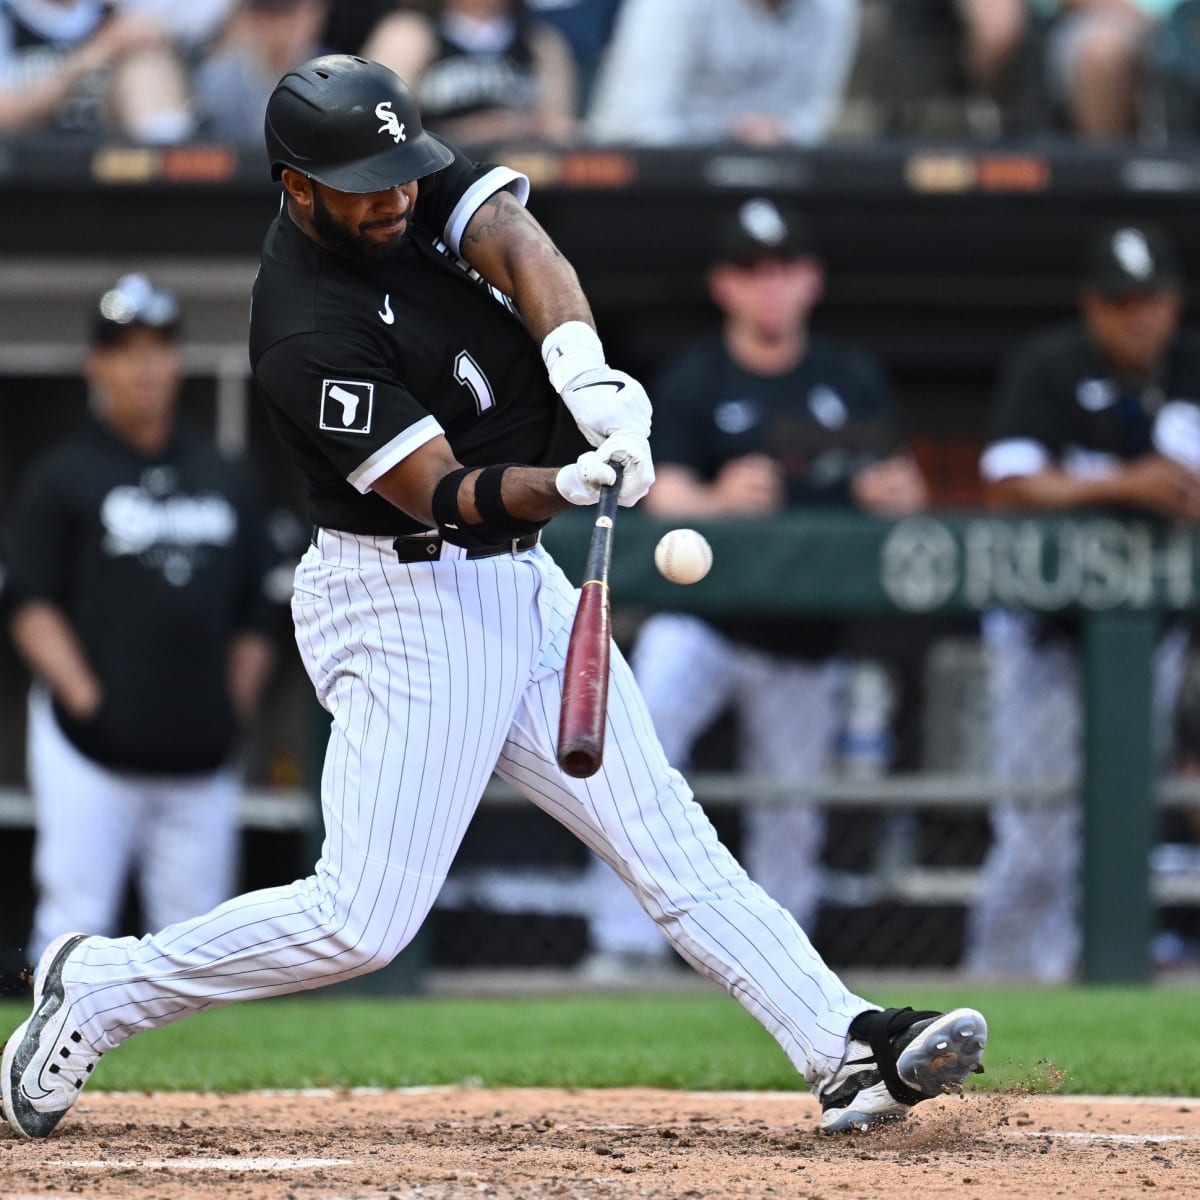 Super humbled' Chicago White Sox infielder Elvis Andrus reflects